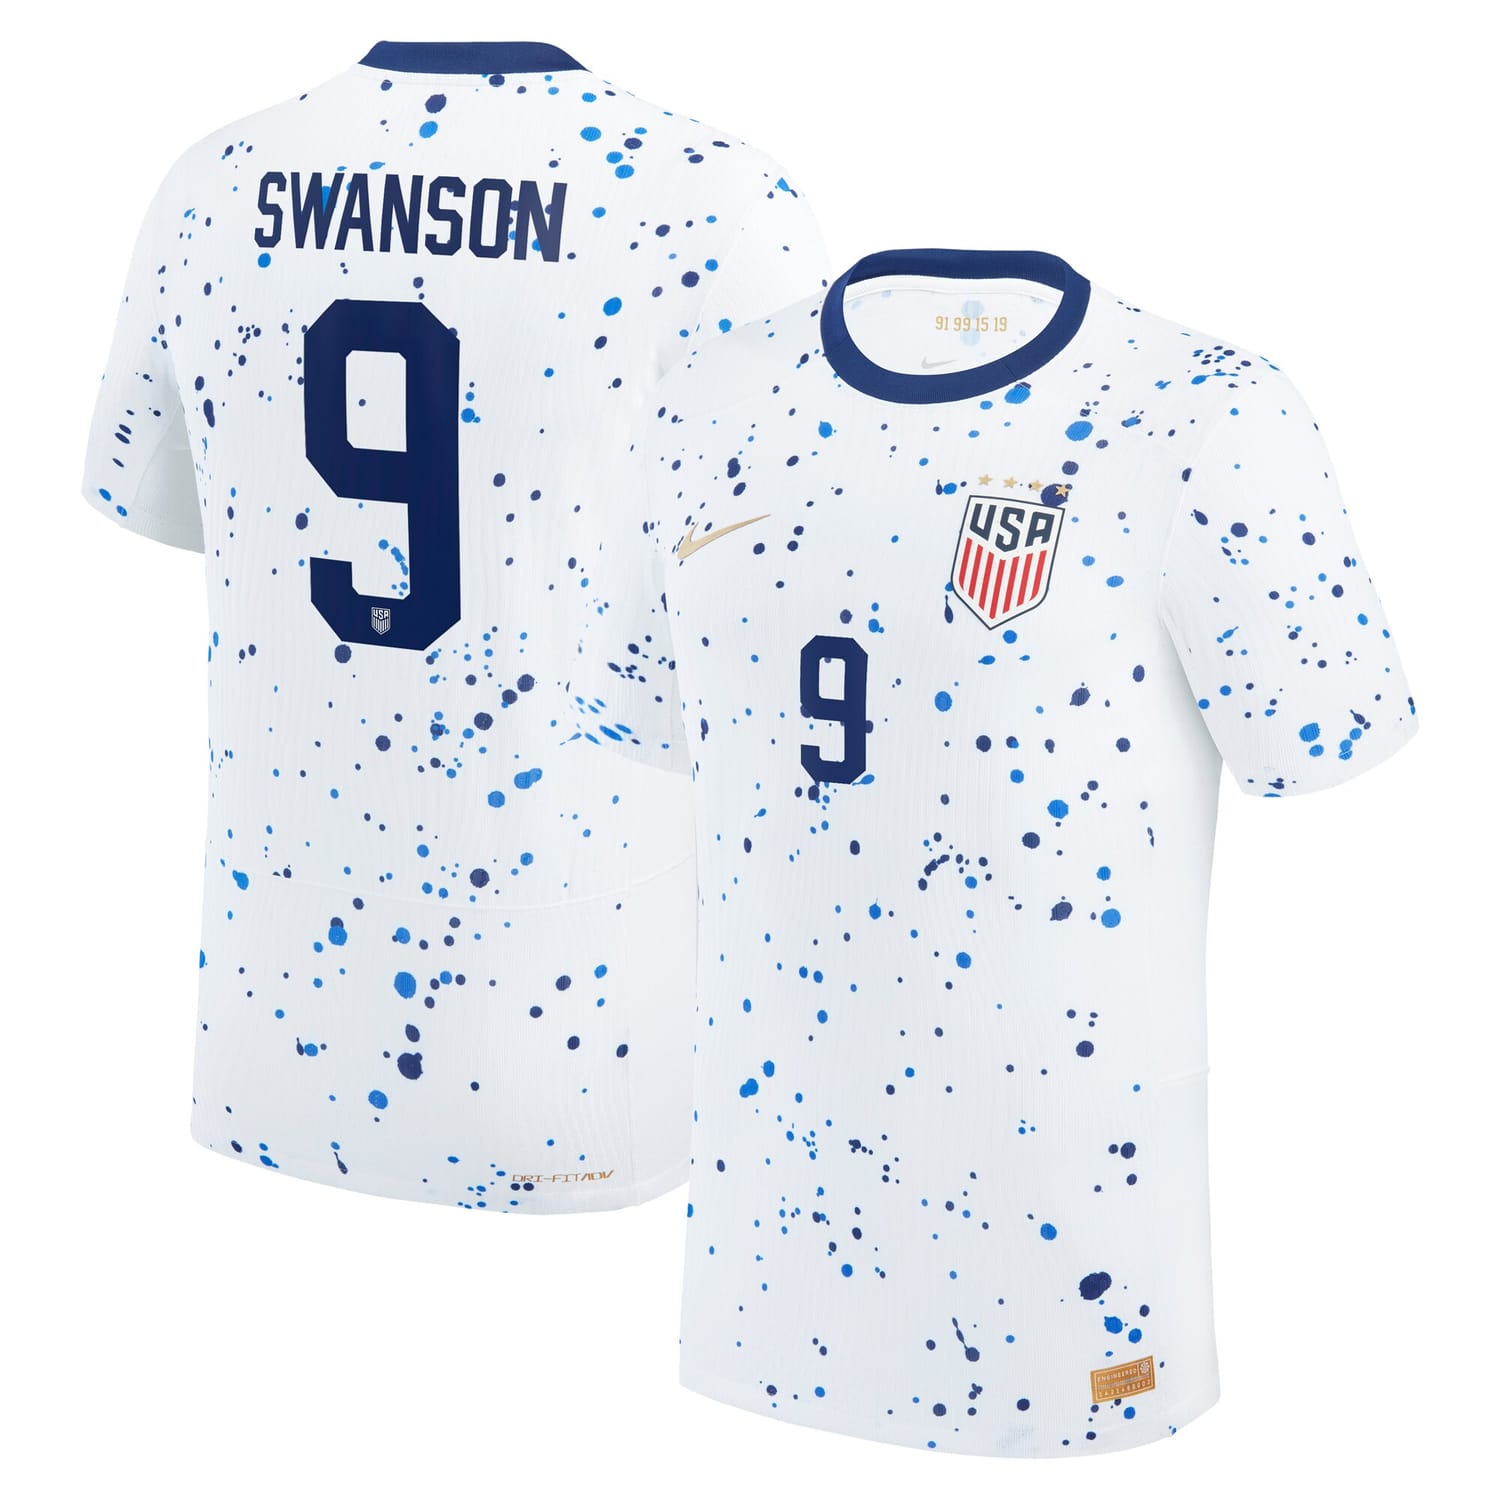 USWNT Home Authentic Jersey Shirt White 2023 player Mallory Swanson printing for Men